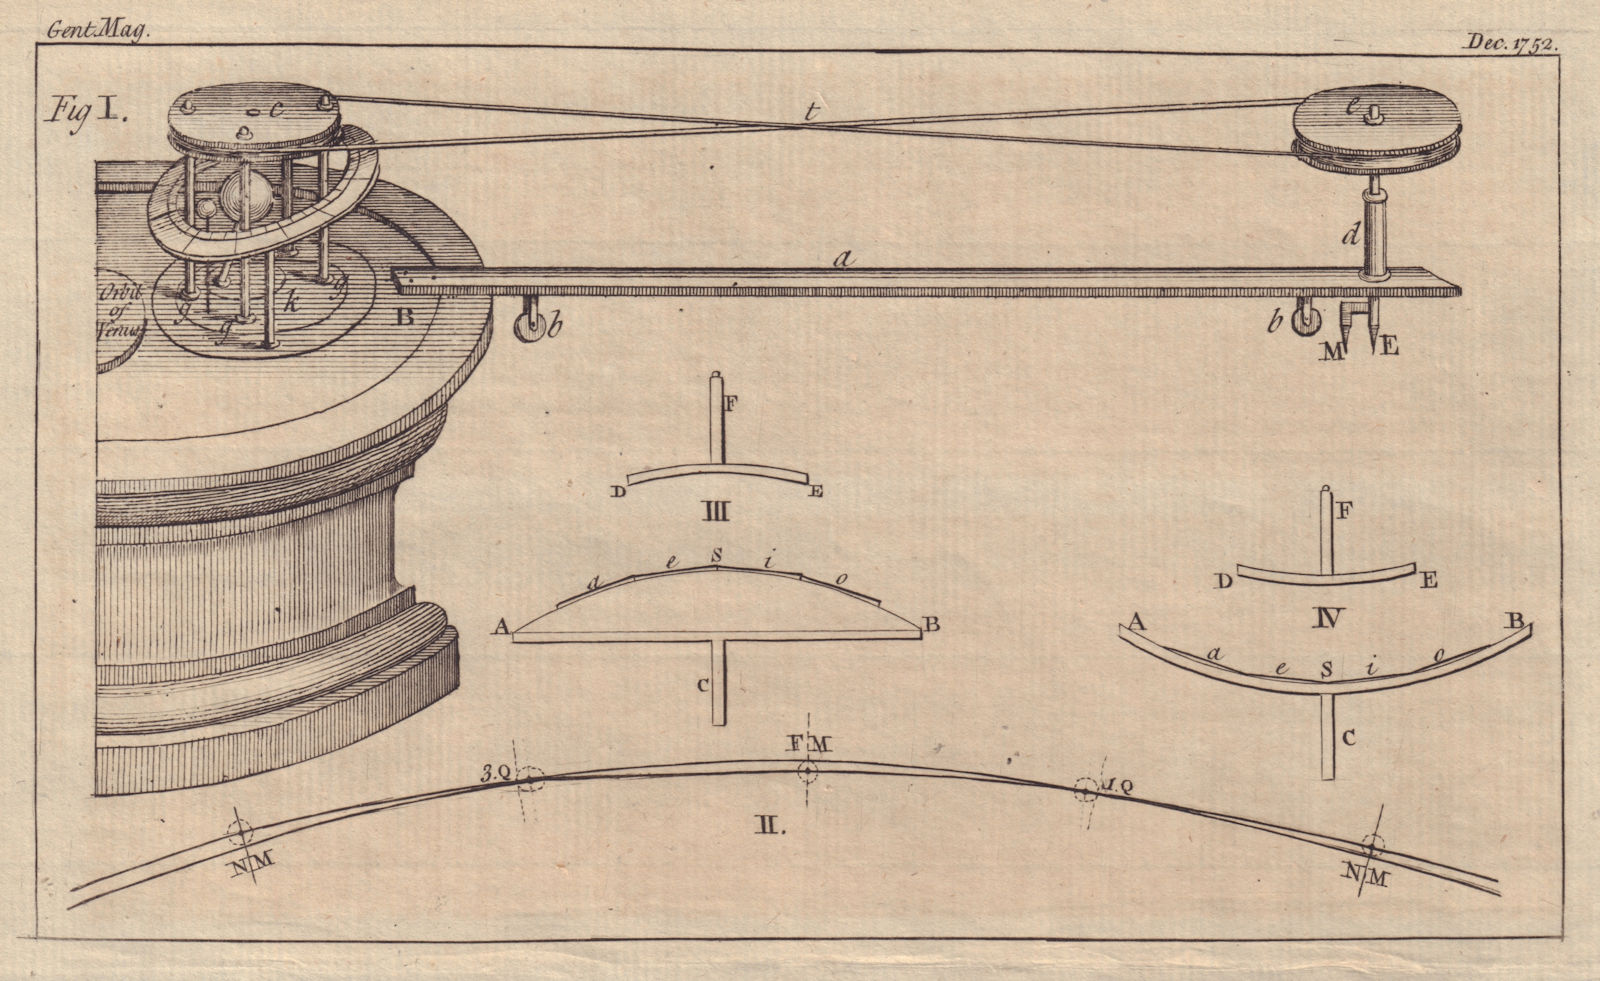 Associate Product A new apparatus for an Orrery. Astronomy. Solar system. GENTS MAG 1752 print